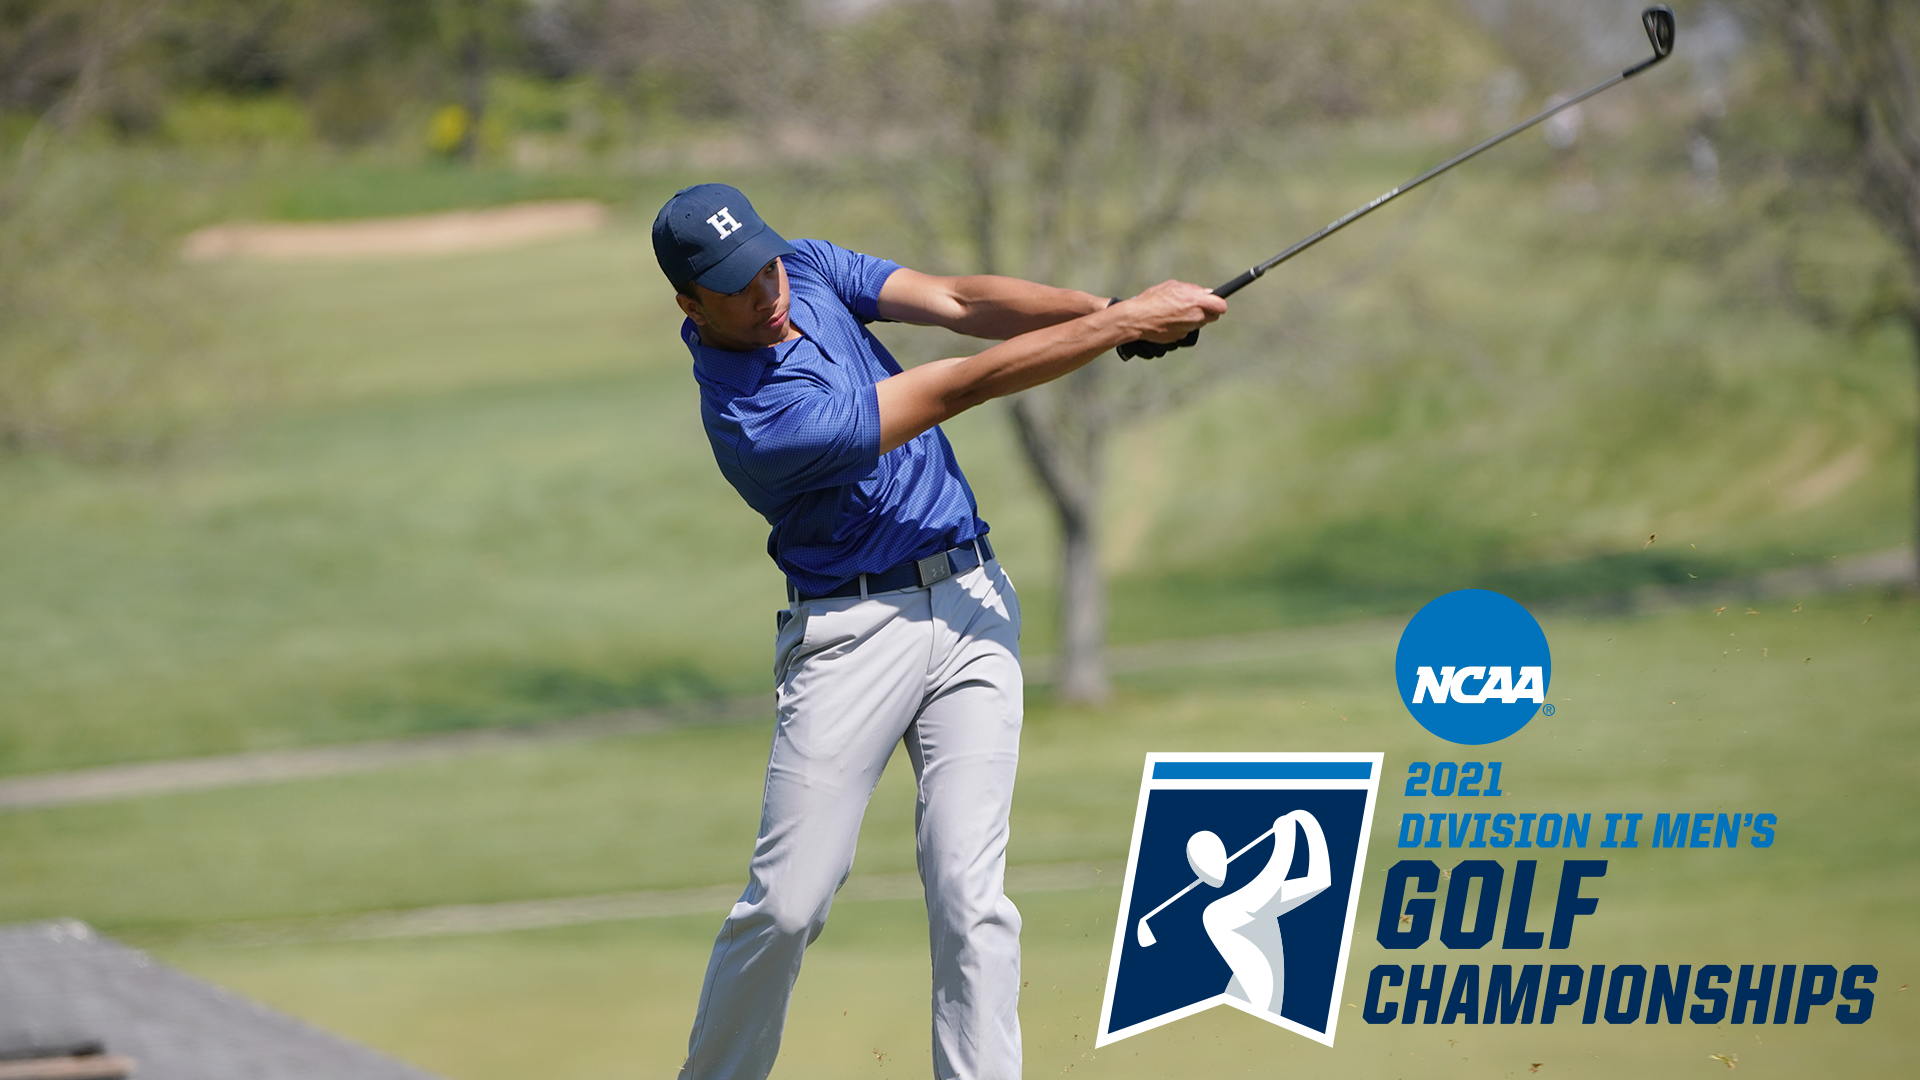 Charger men's golf team makes NCAAs for second time in three seasons